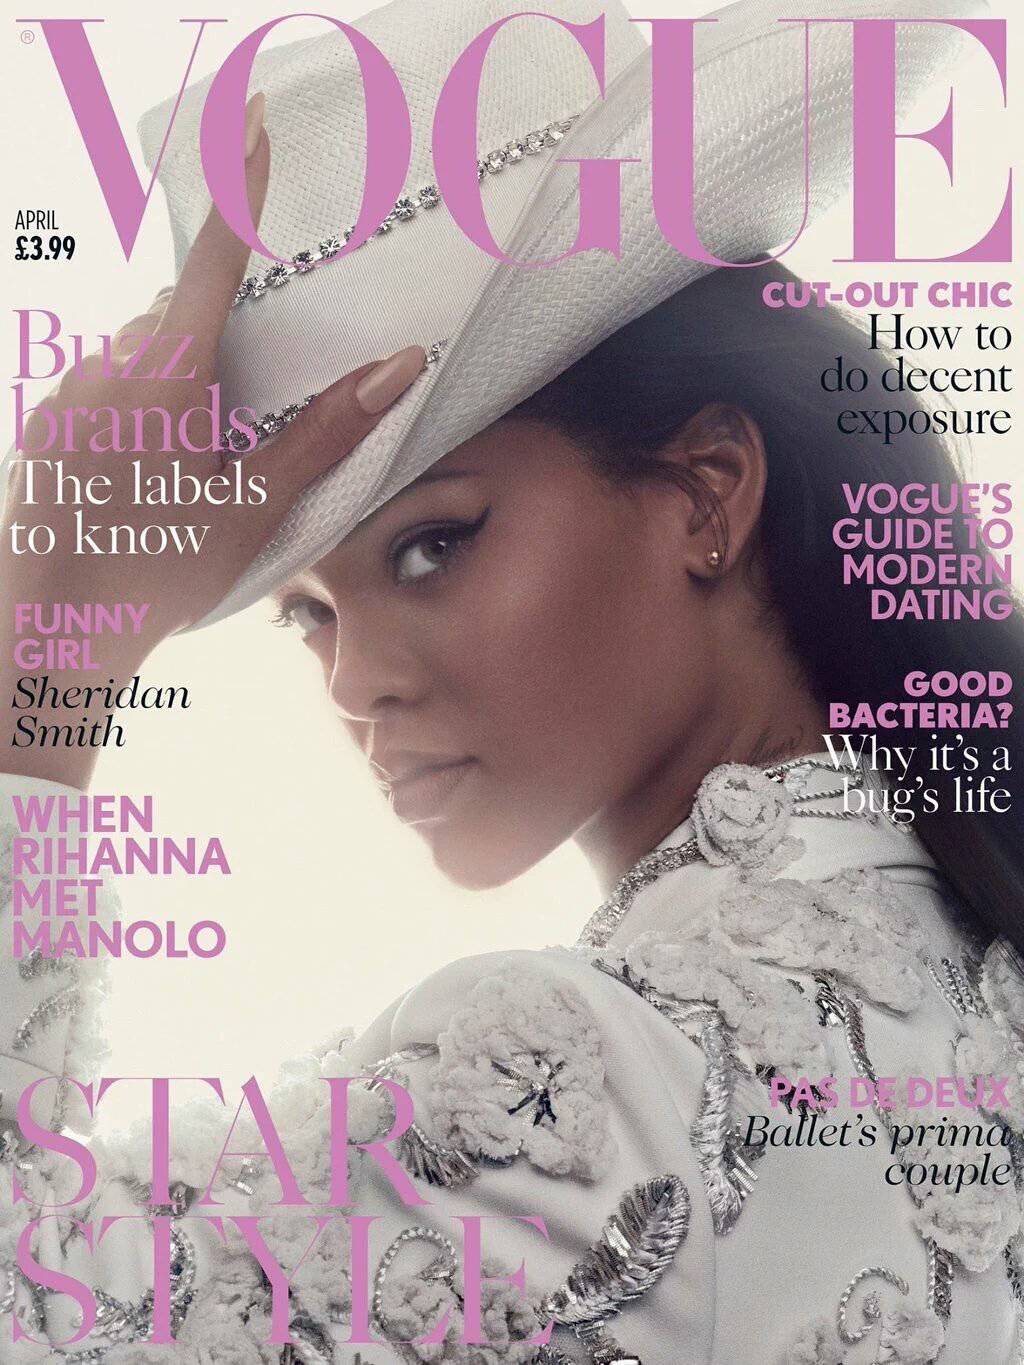 Rihanna This is Image 2 from Vogue Magazine's Black Cover Models BET